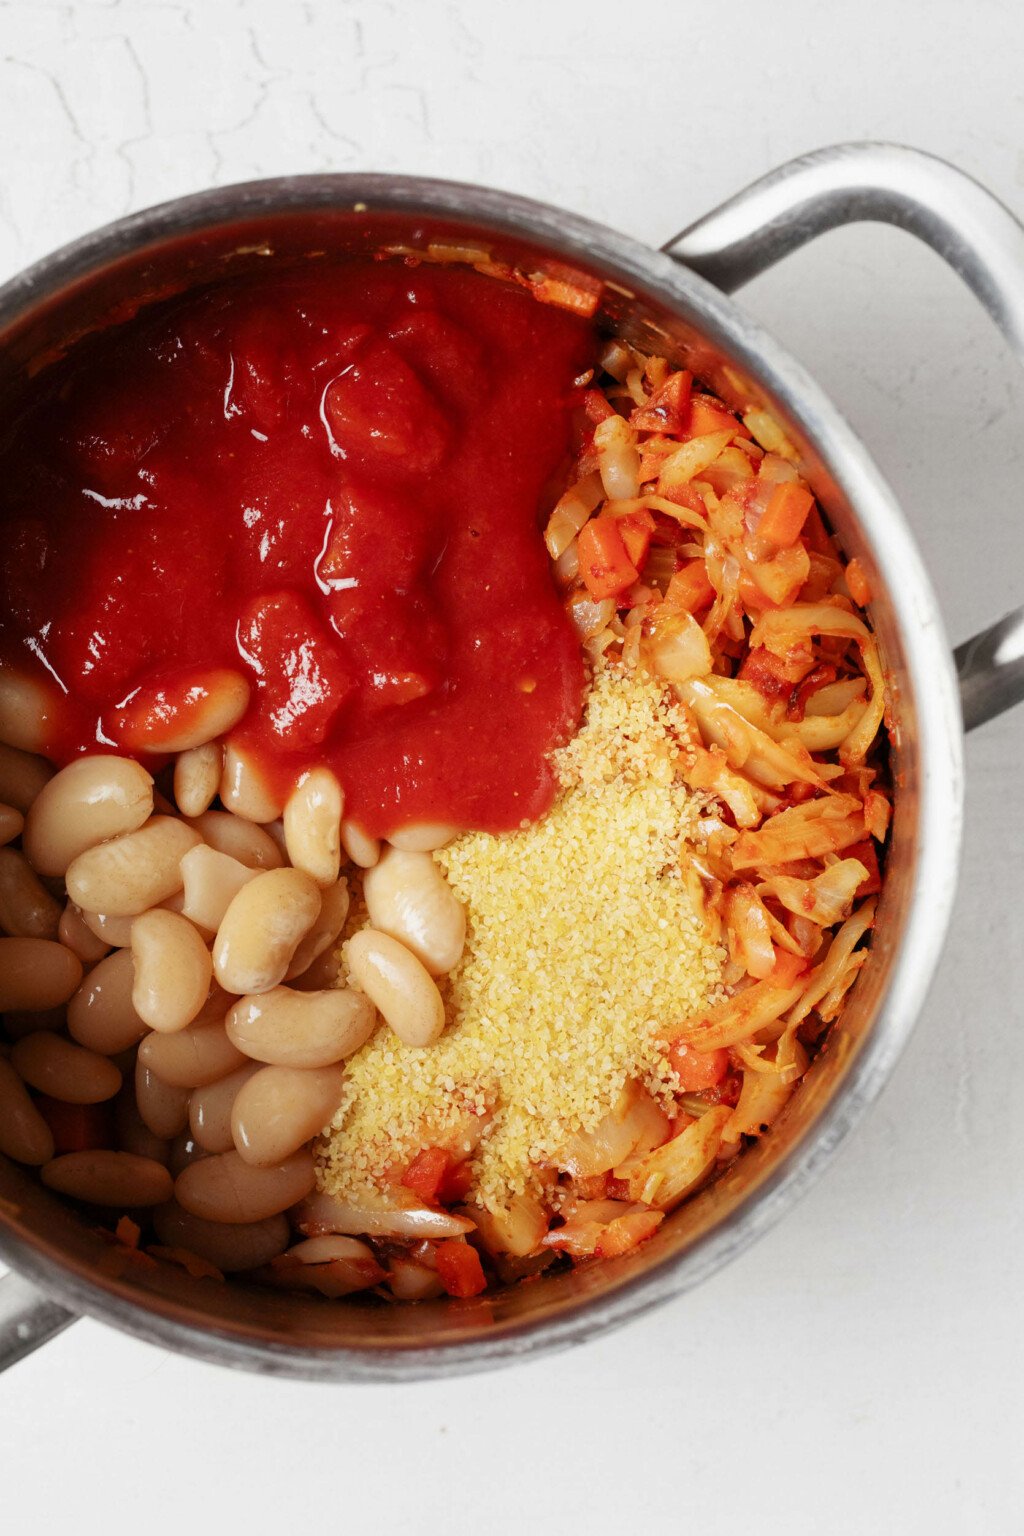 An overhead image of a silver pot, filled with navy beans, cabbage, bulgur wheat, and tomatoes.